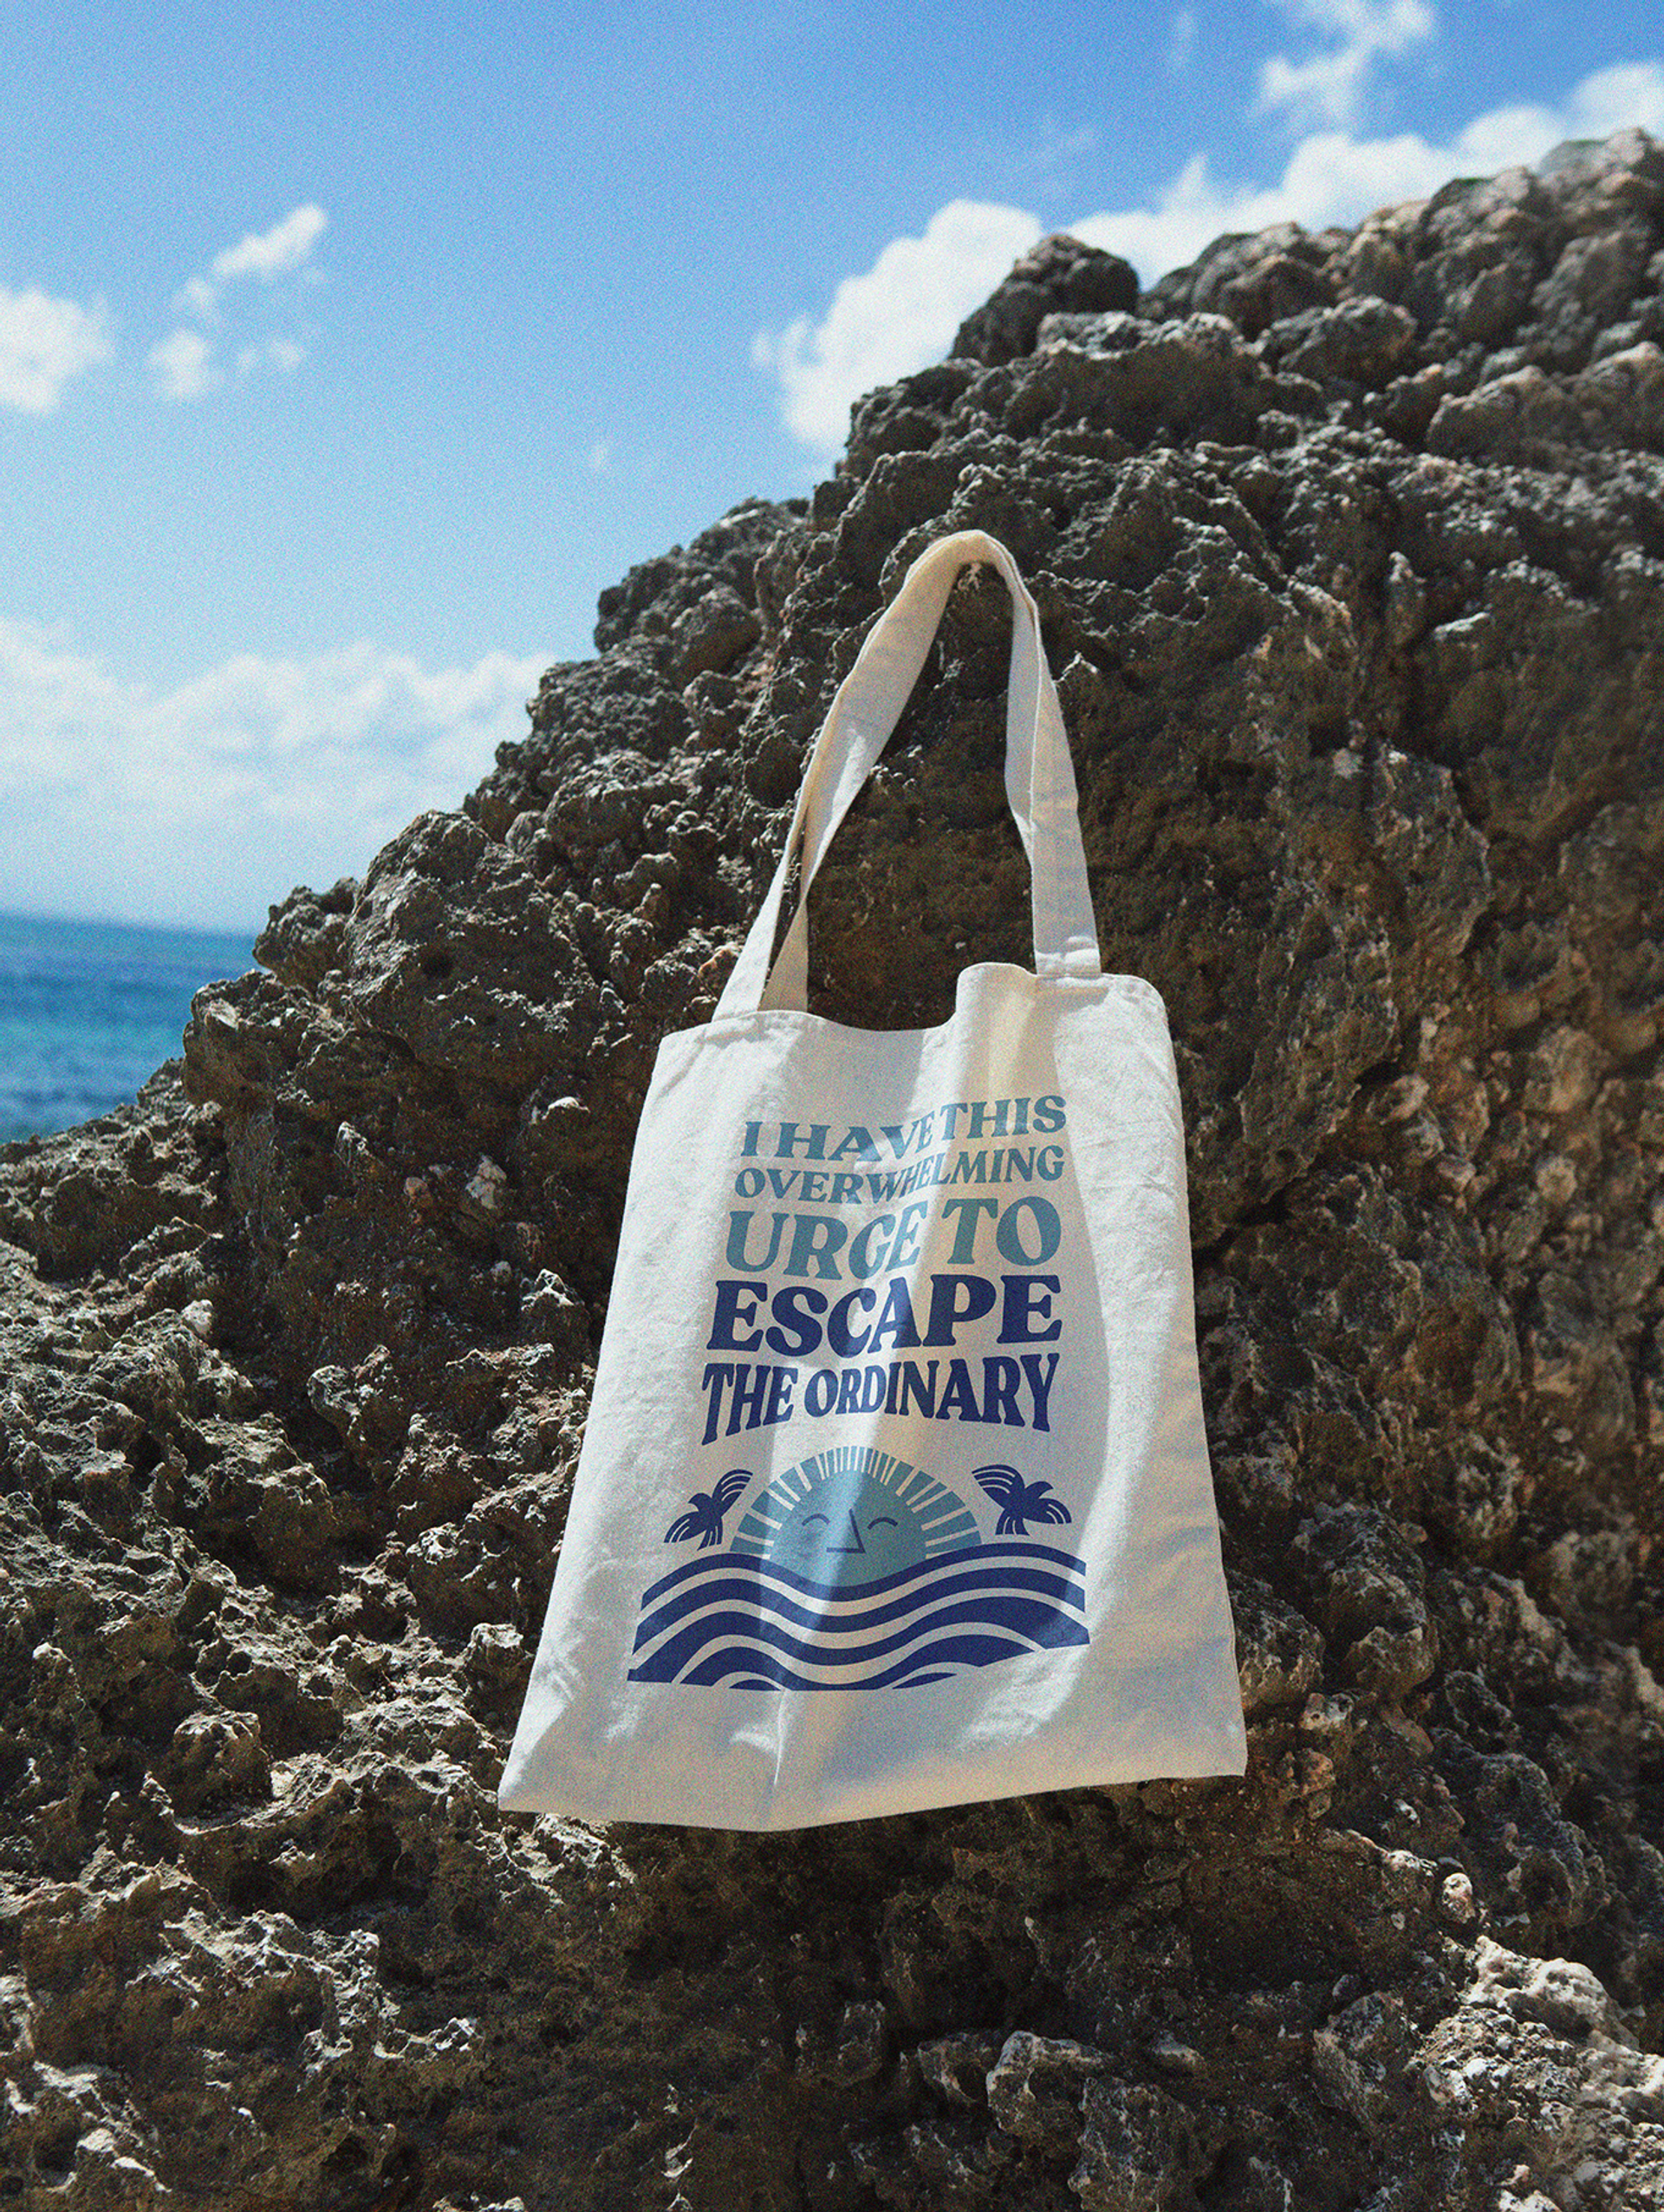 White Liberty Coast branded tote bag with slogan “I have this overwhelming urge to escape the ordinary” in front of coastal rocks designed by Our Revolution